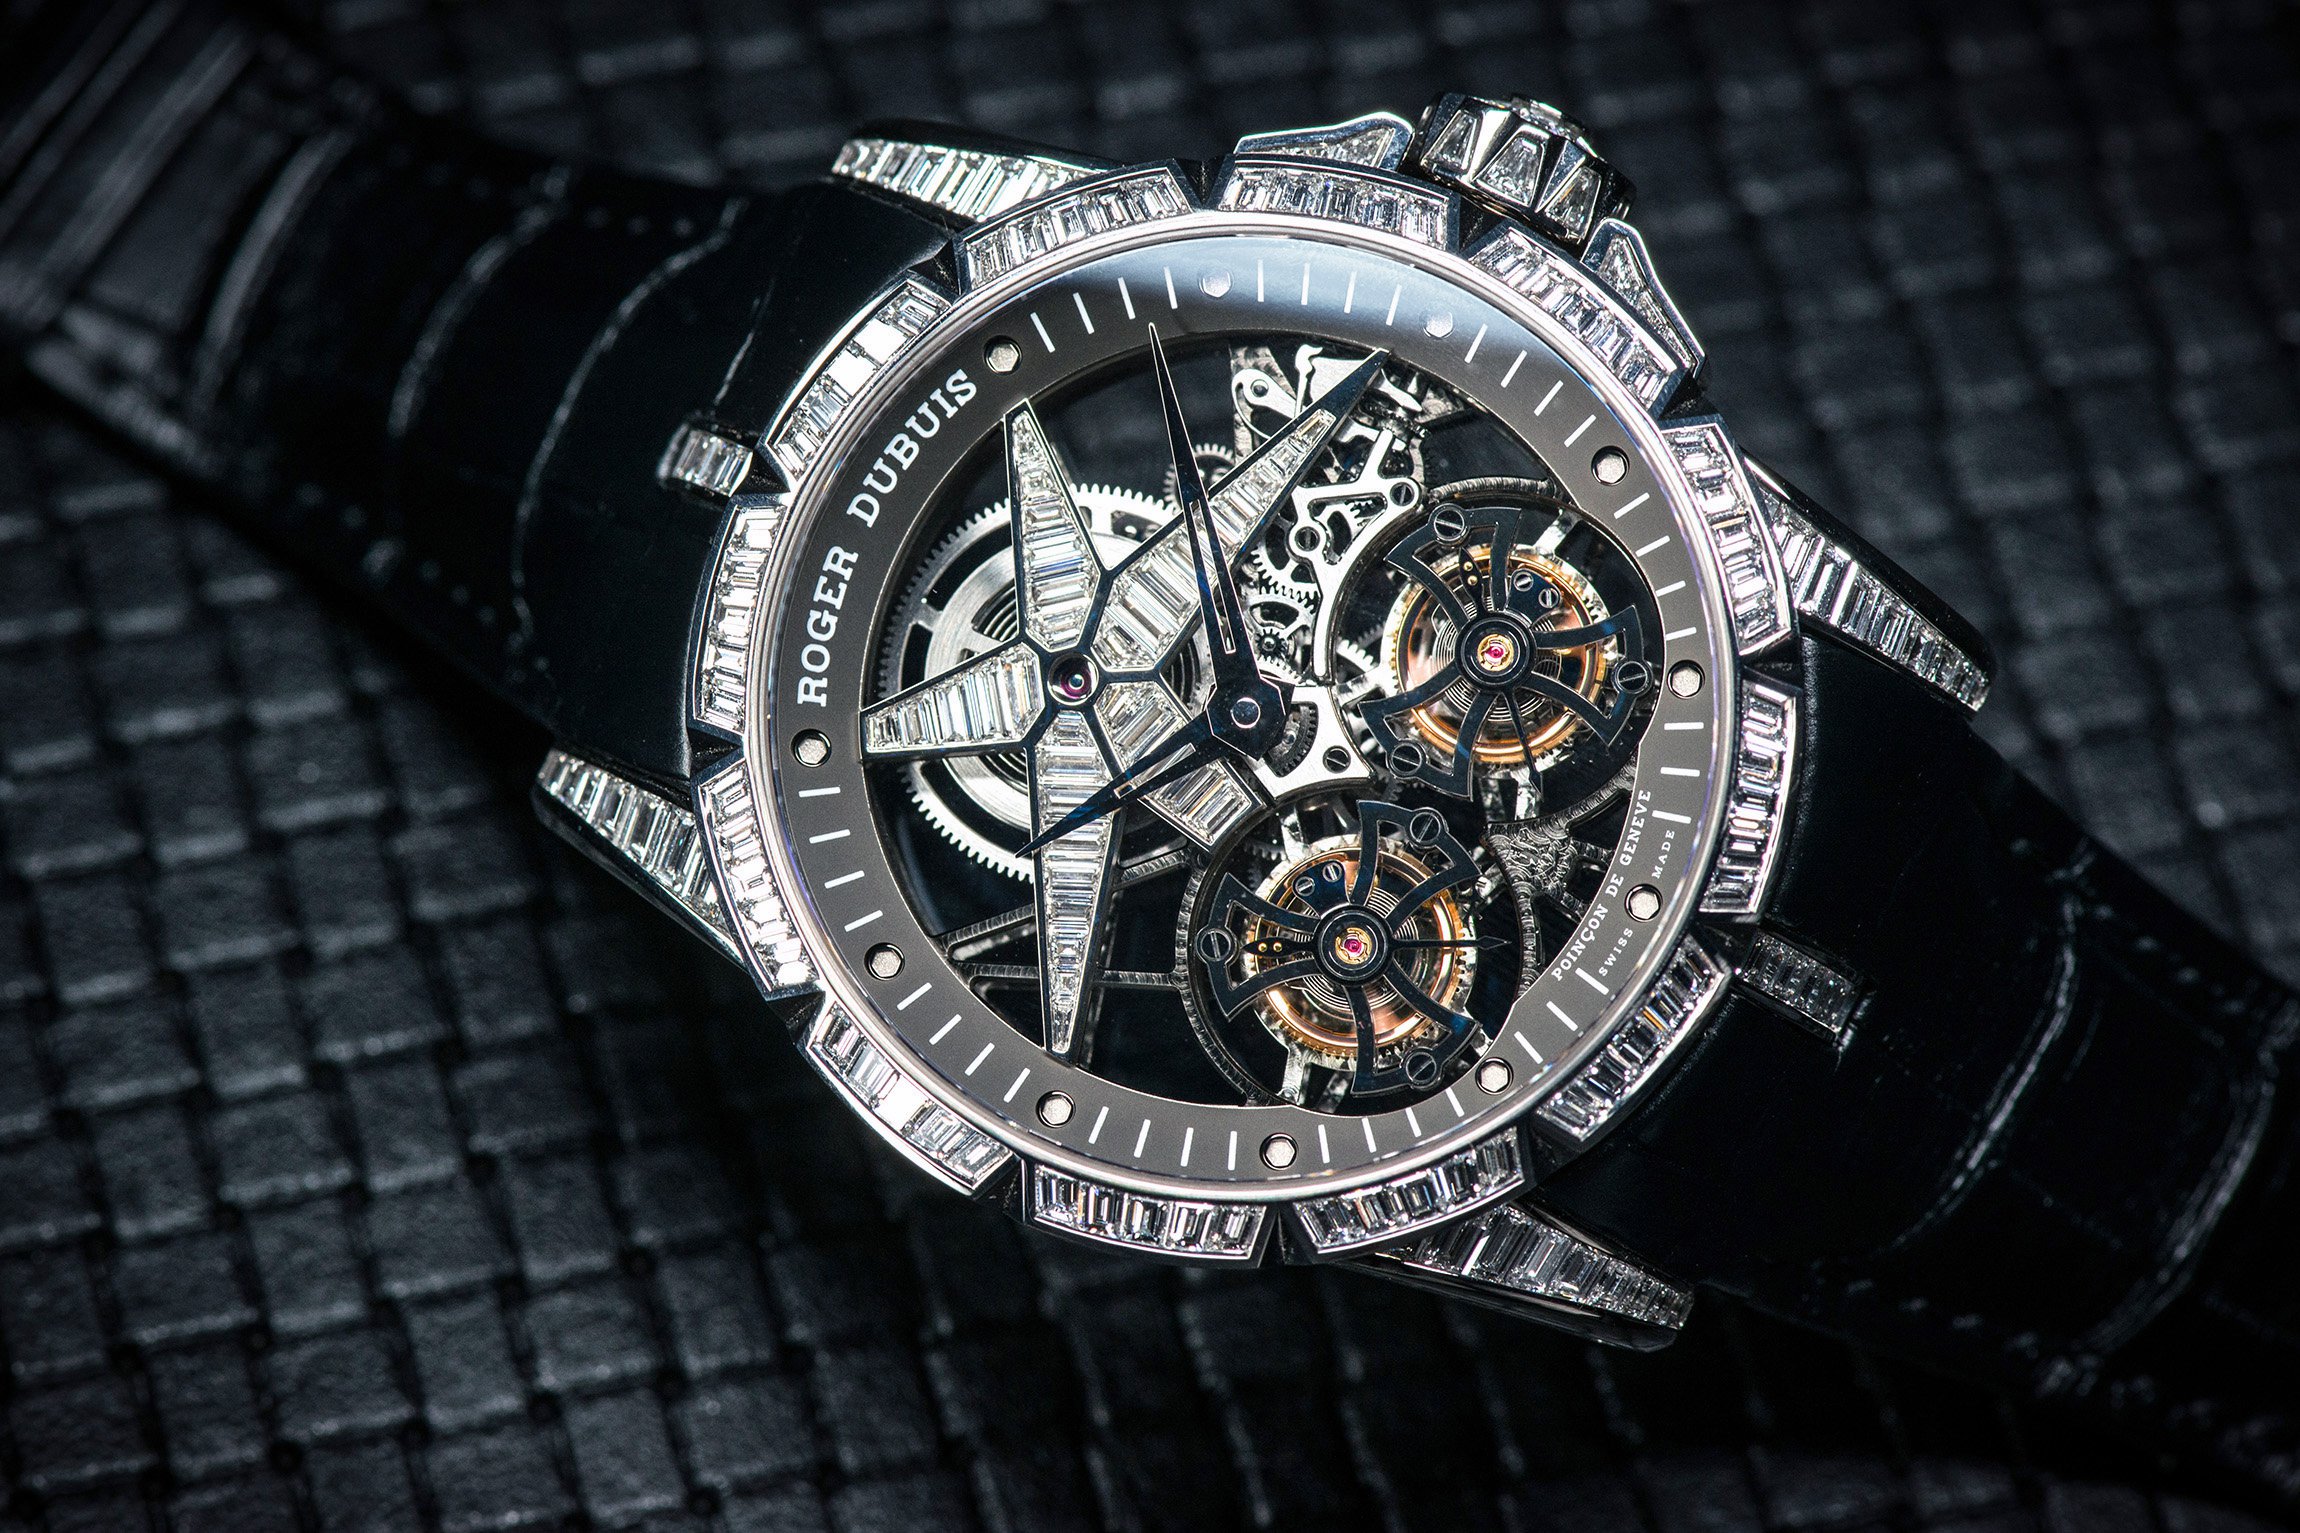 Roger Dubuis Excalibur Star Of Infinity At Watches & Wonders 2015